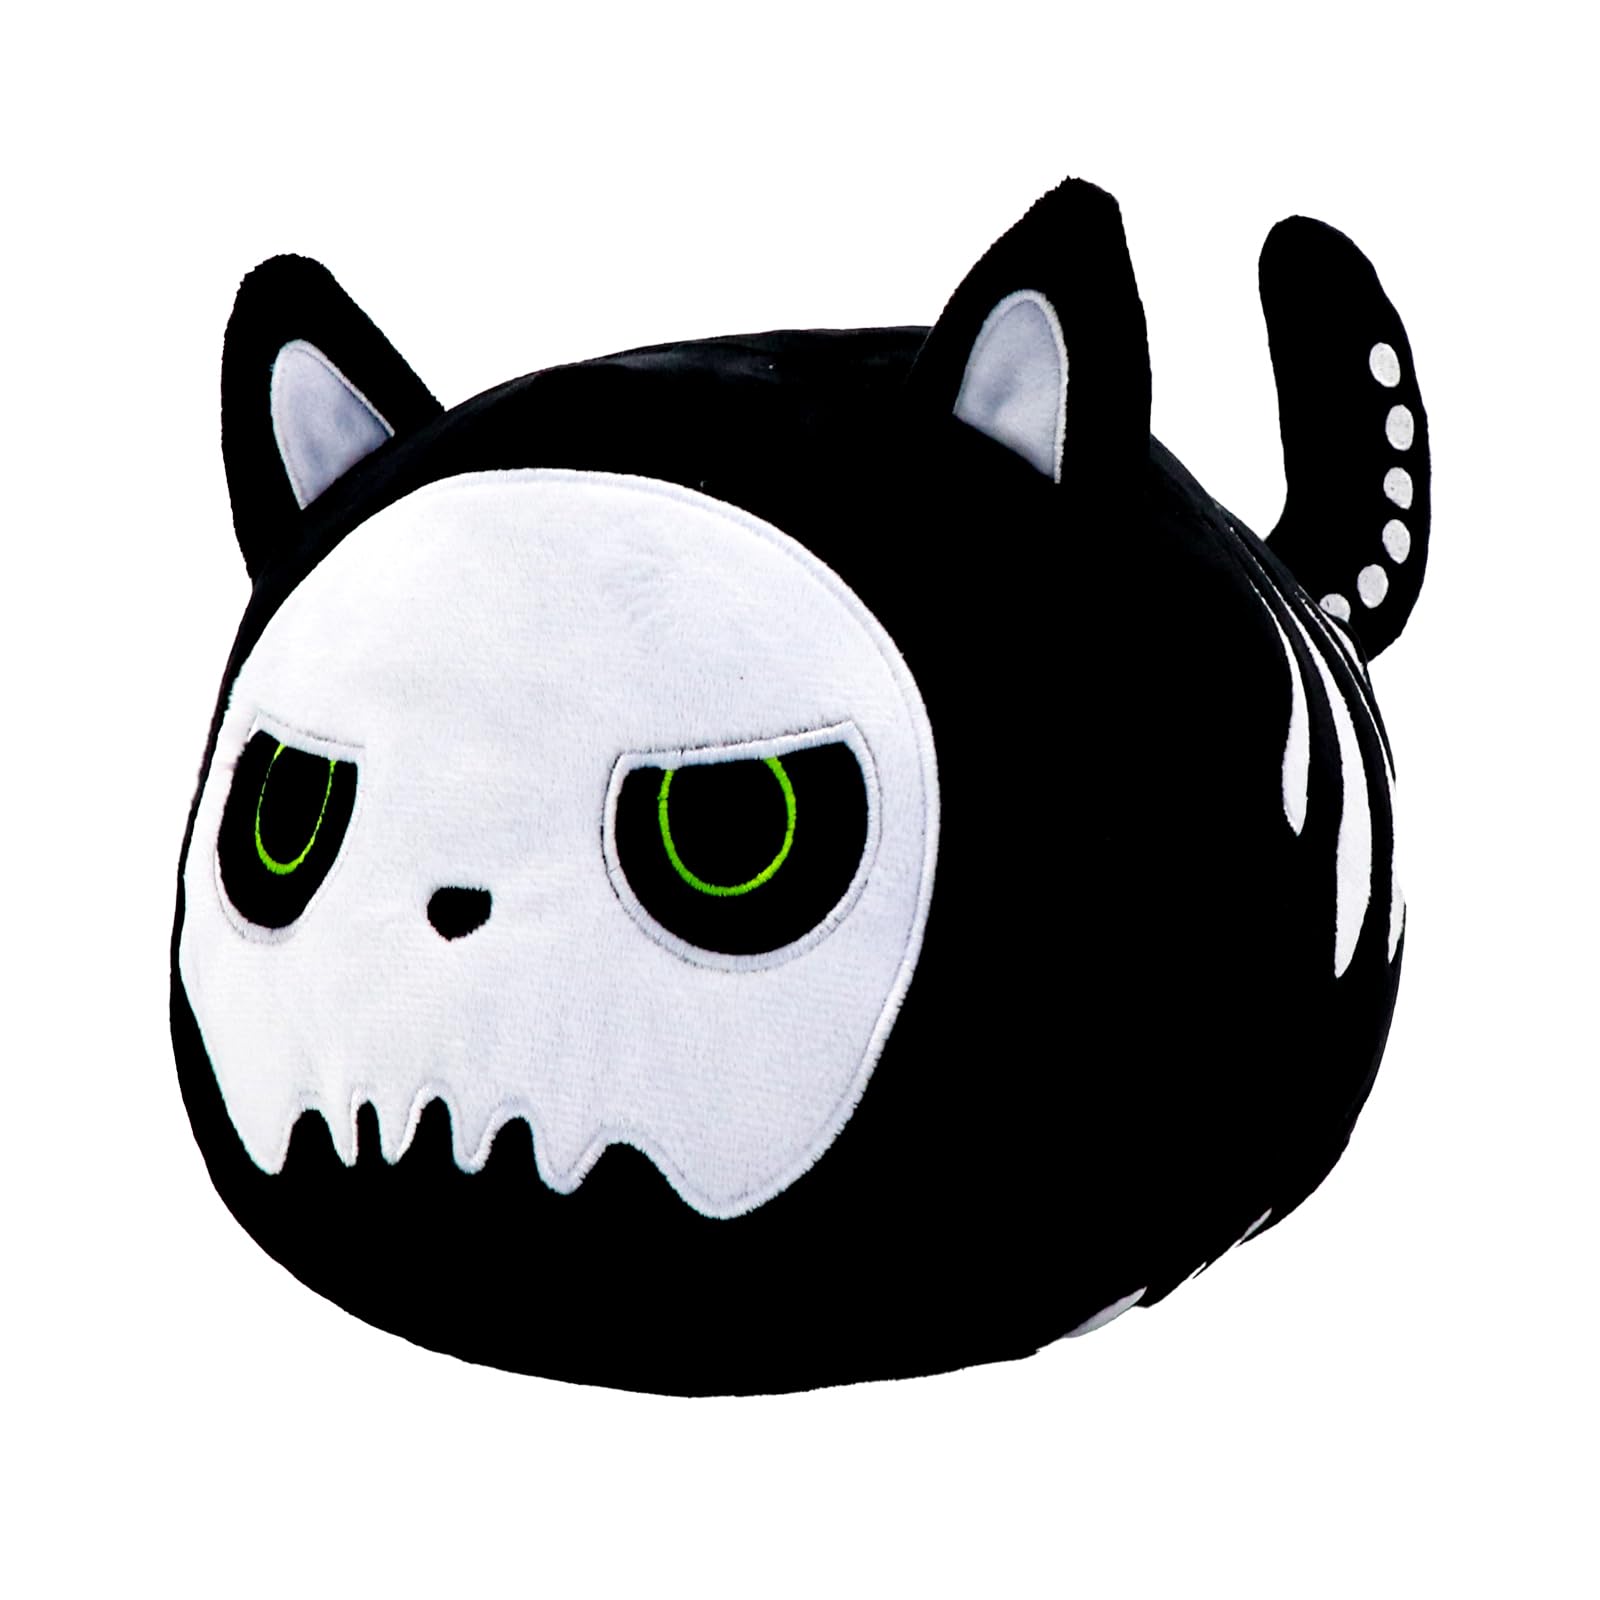 Halloween Black Cat Plush,11inch Black Cat Plushies Toys Stuffed Animal Pillows Cute Skeleton Black Cat Plushie Doll Toys,Collectible Gifts for Kid Fans Aldults Birthday Gifts,Halloween Home Decor